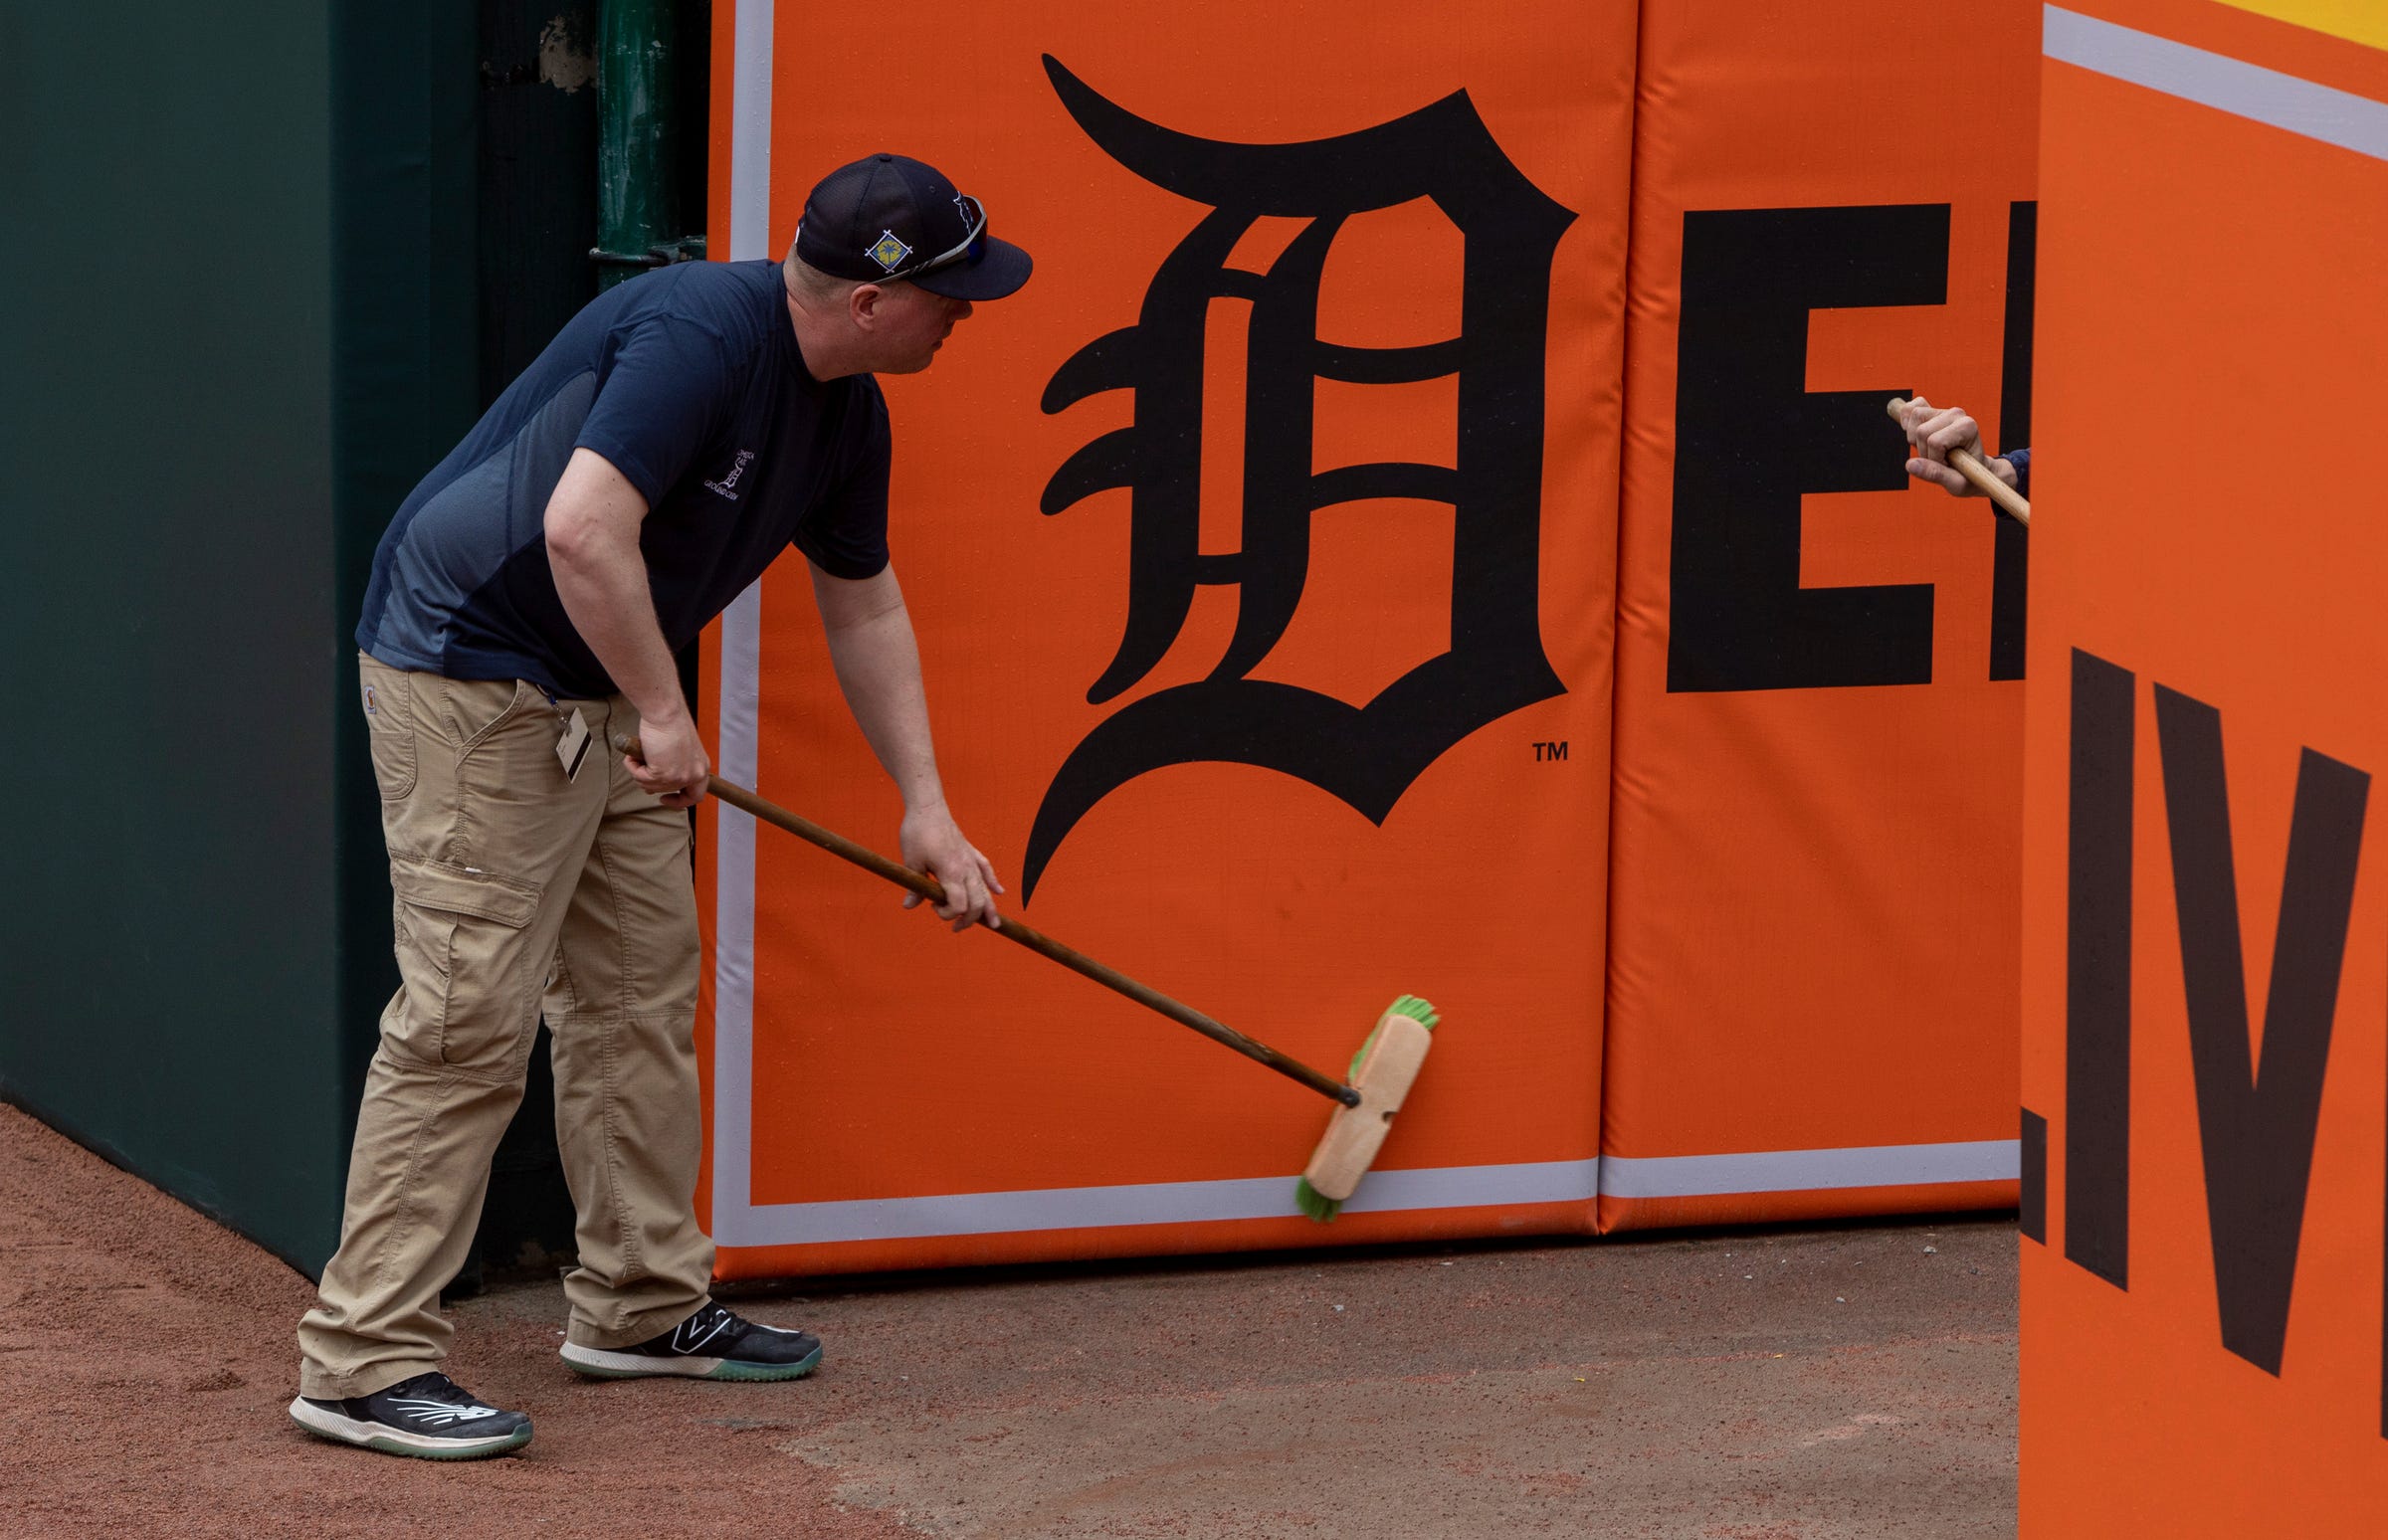 Members of the grounds crew clean the outfield walls during Opening Day preparations inside Comerica Park on Wednesday, April 5, 2023.